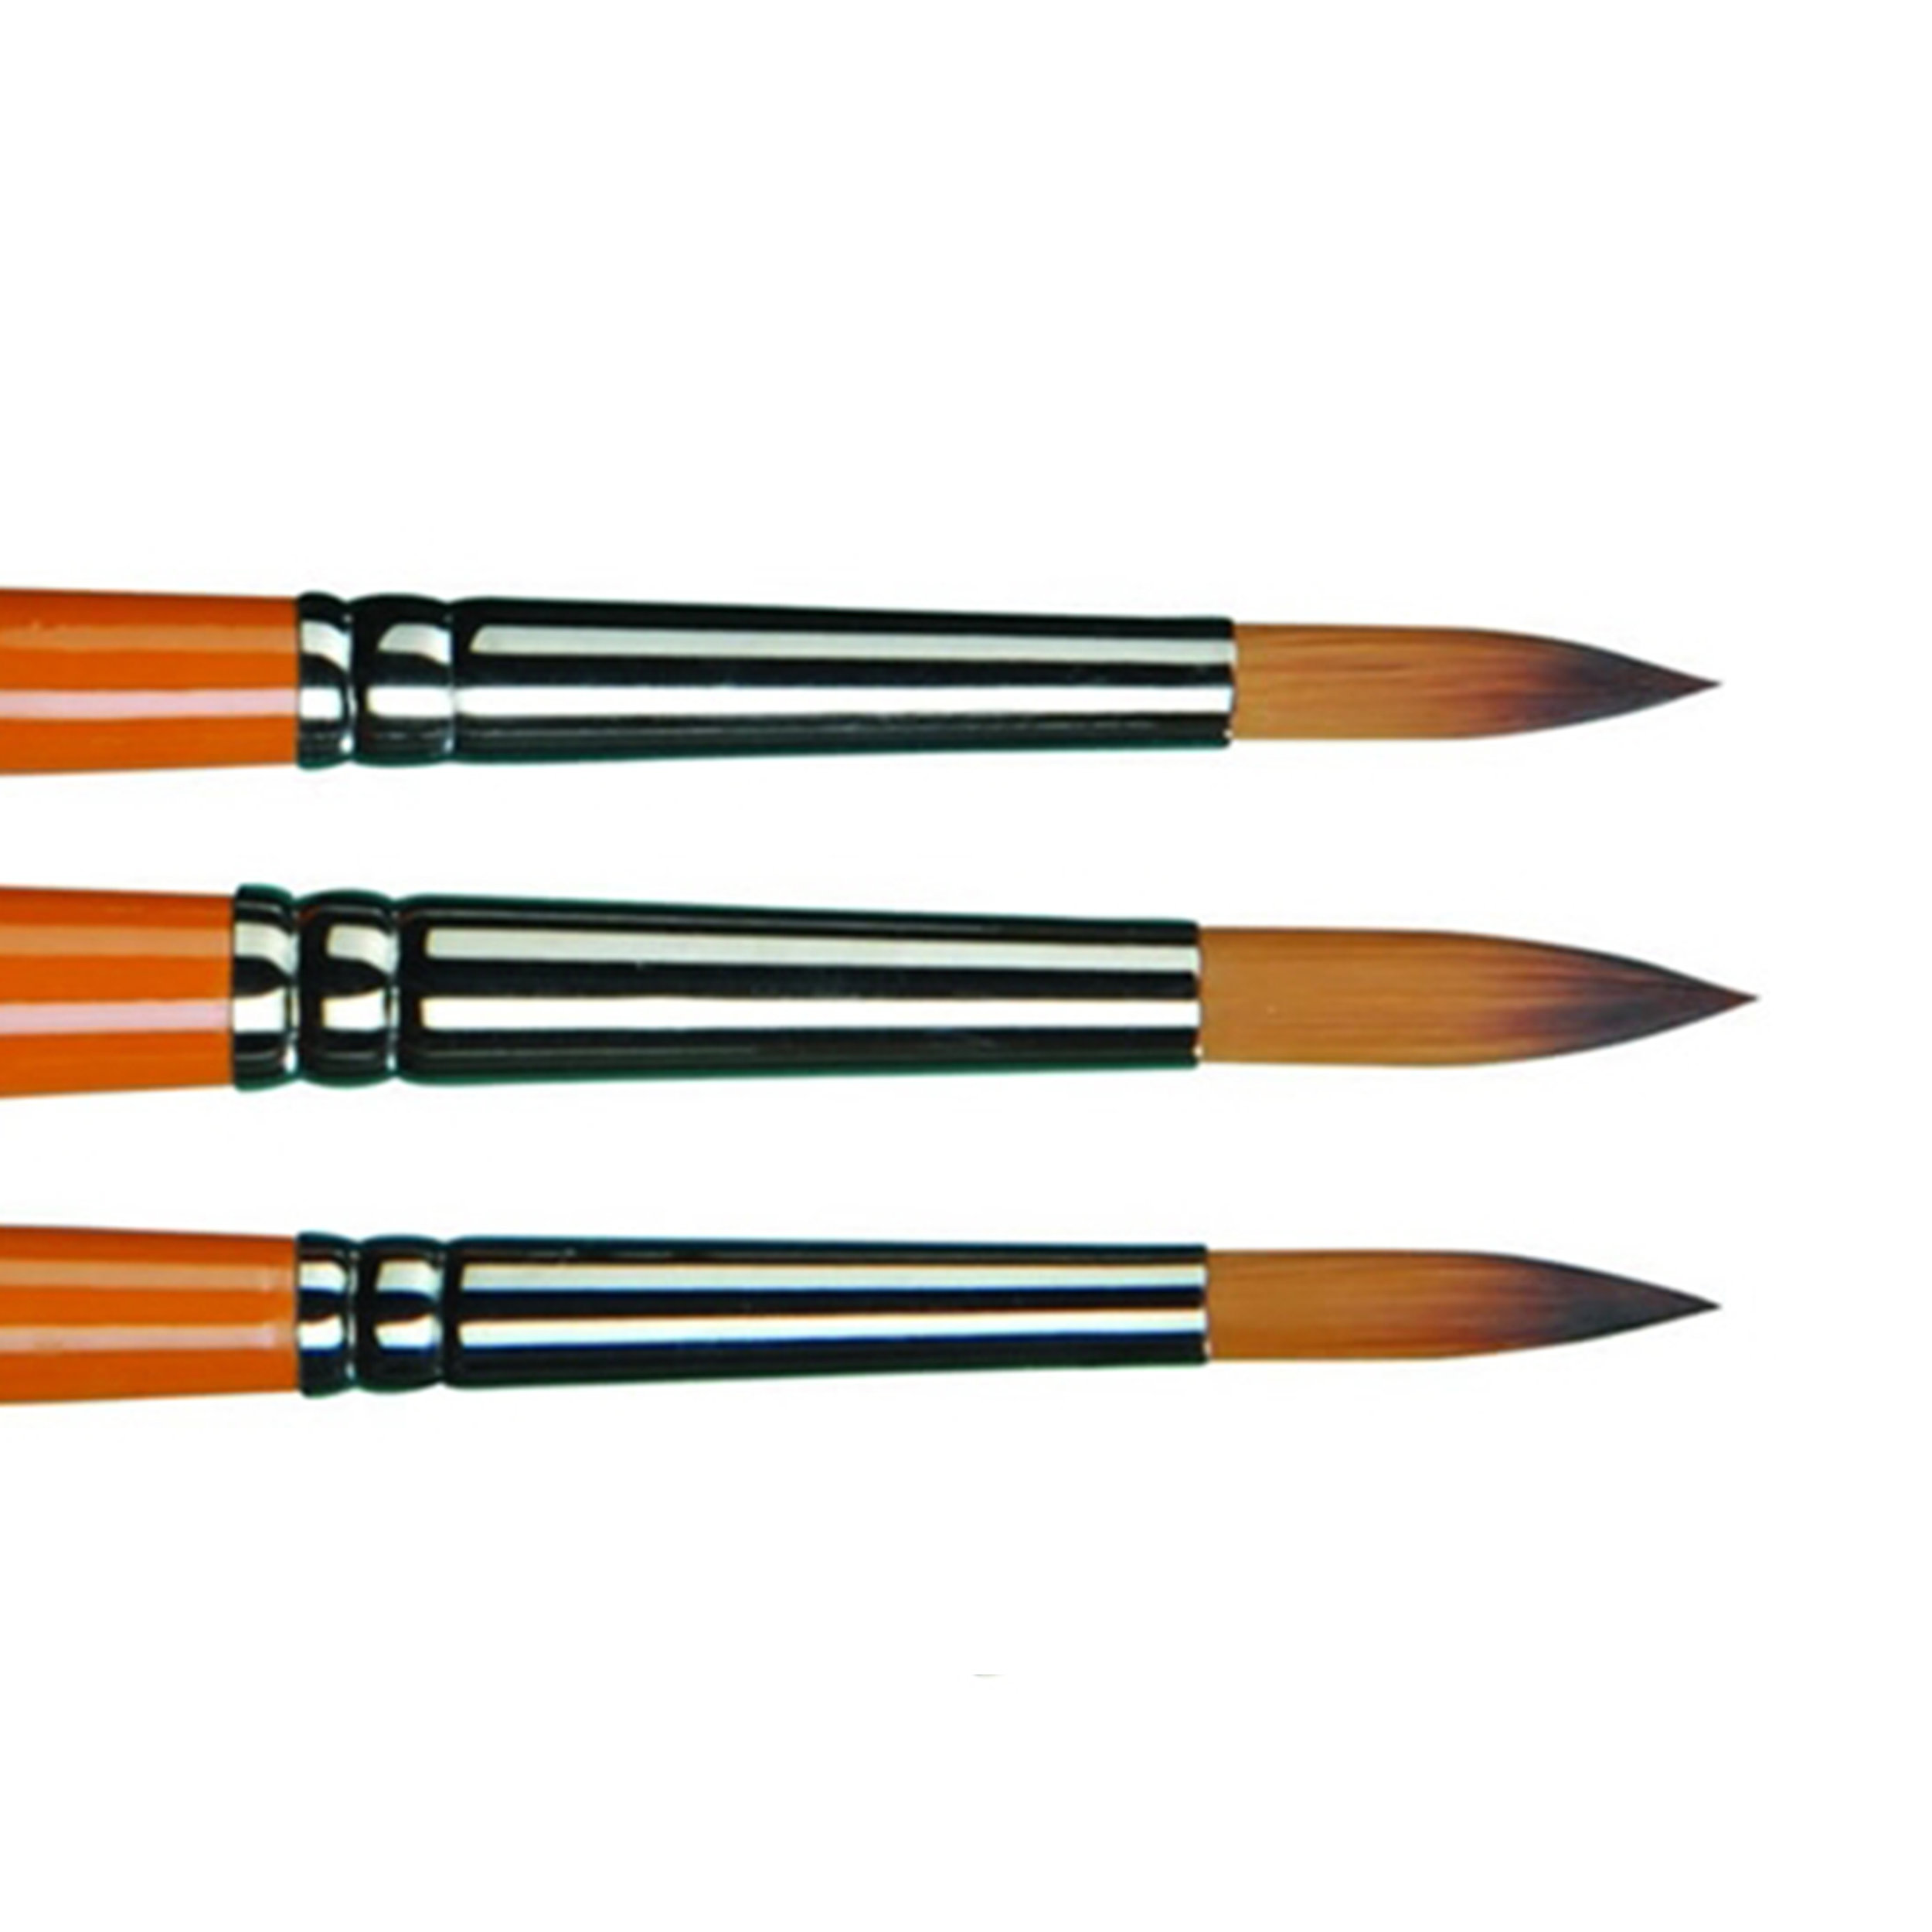 Jerry Q Art 13 Pcs Detail Paint Brushes, Double Color Synthetic Hair, High  Performance for Oil, Acrylic and Watercolor JQ-501